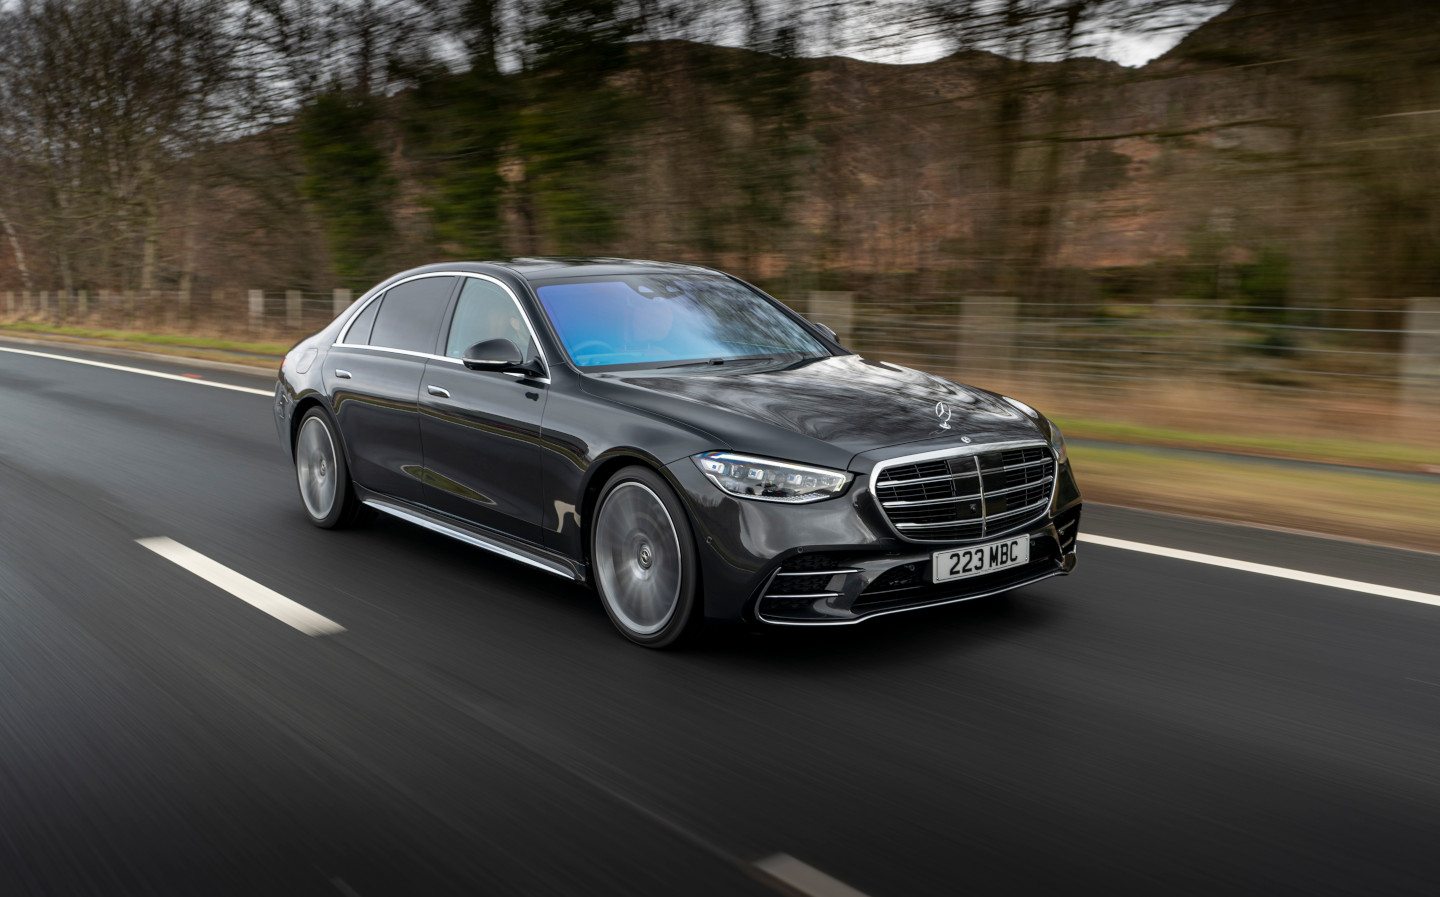 The Mercedes S-Class is too complicated for Jeremy Clarkson